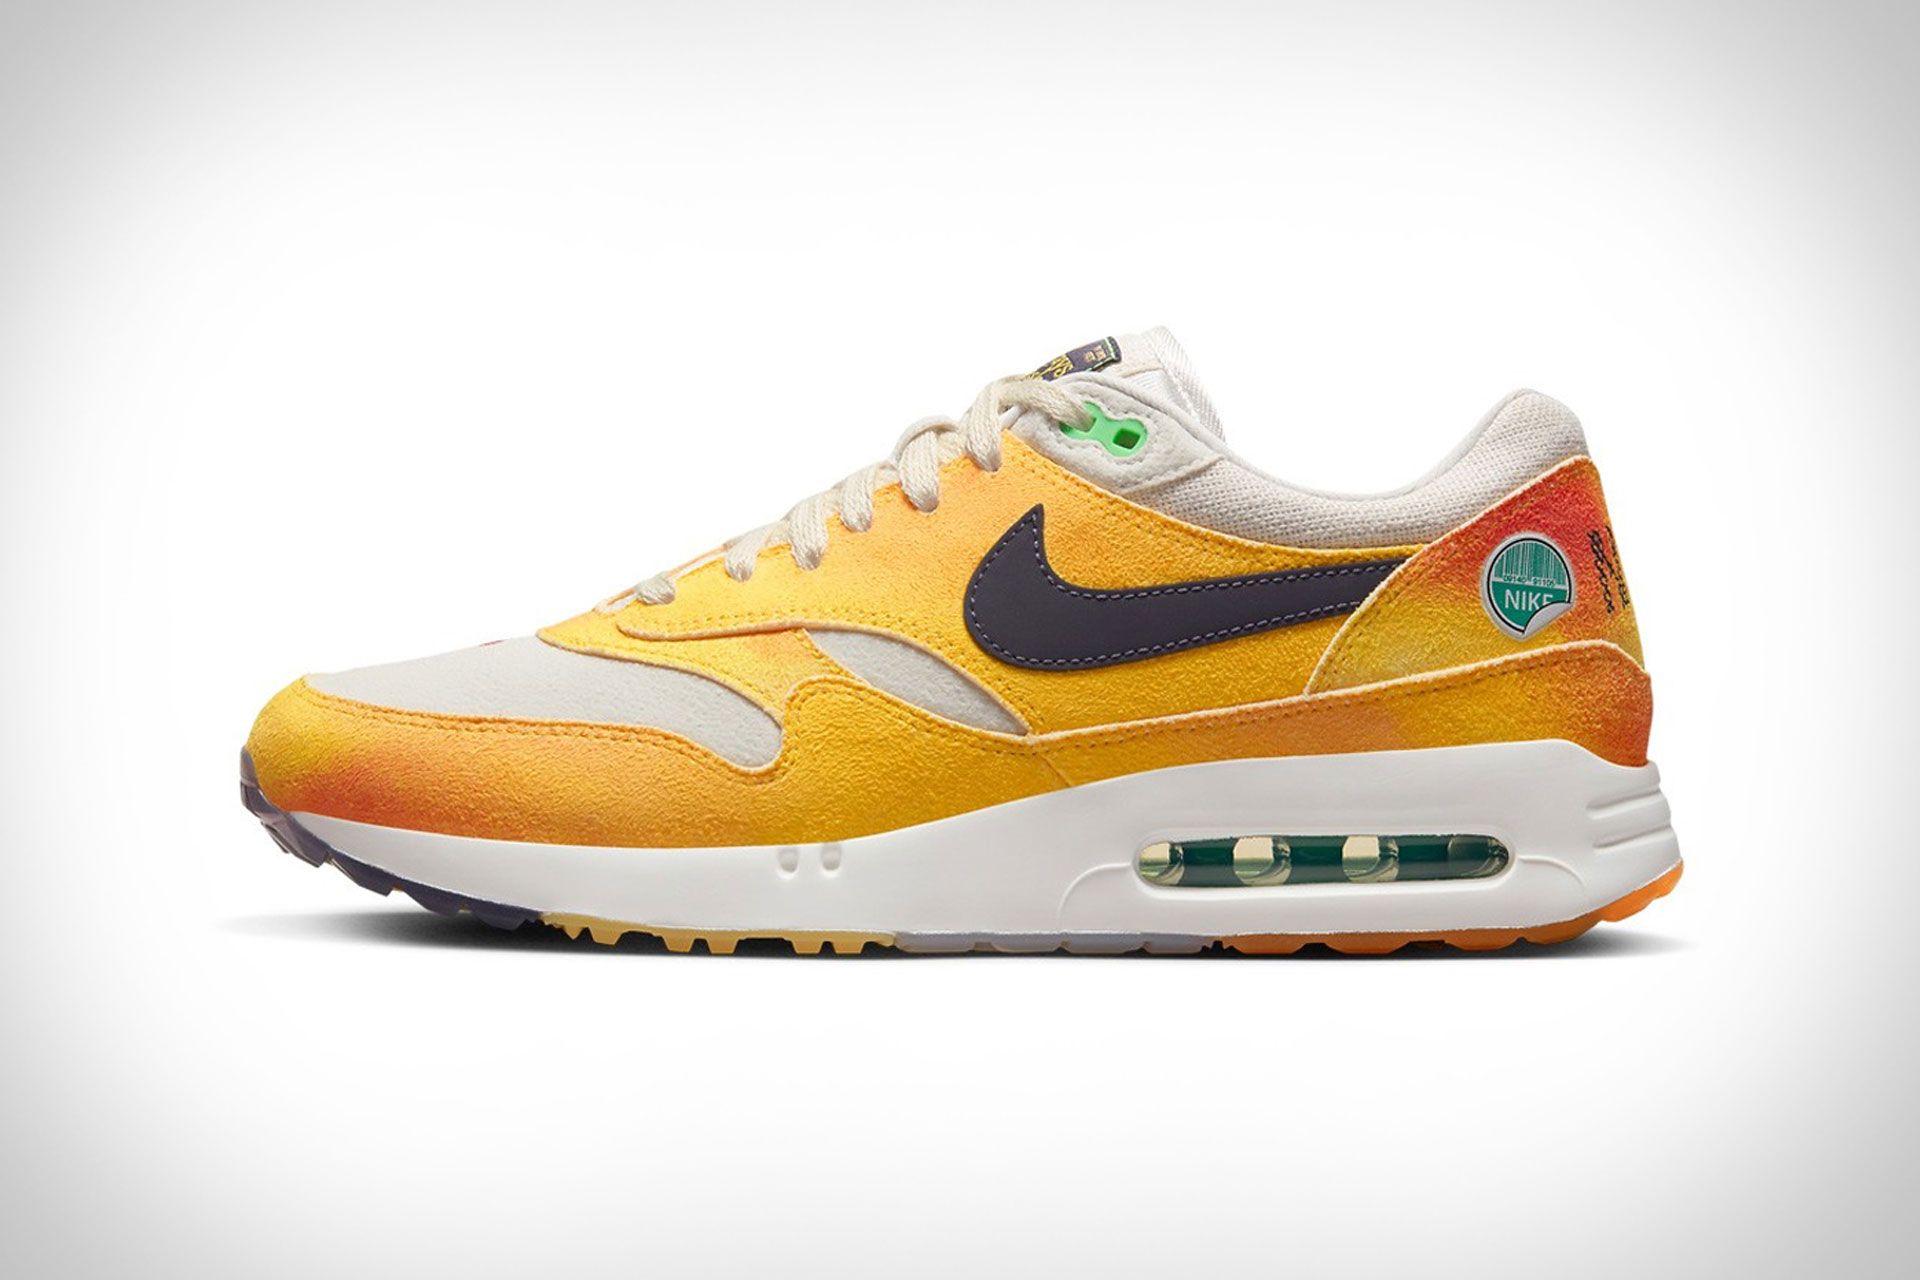 Nike Air Max 1 G Always Fresh Golf Shoes | Uncrate